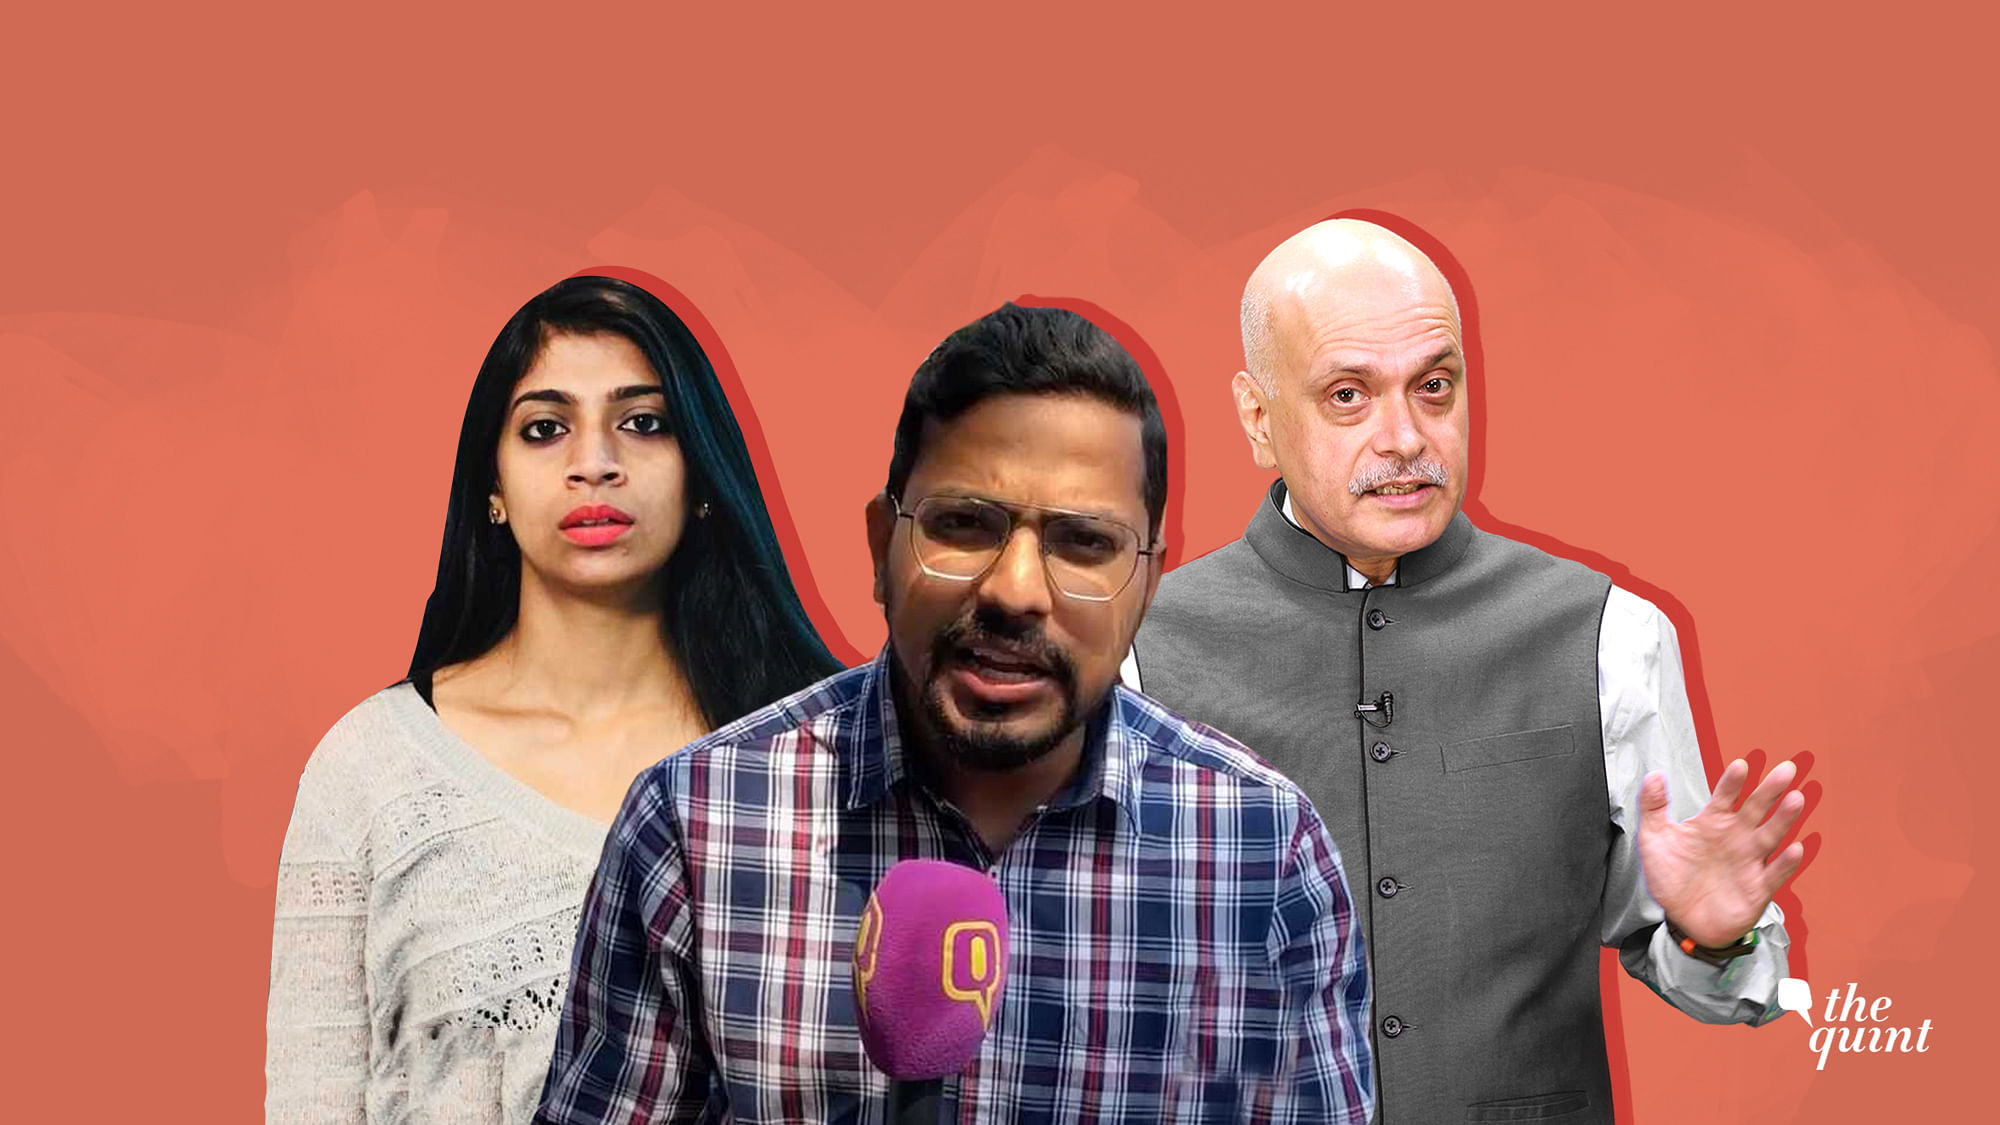 The Quint went across India to get you real voices and real issues.&nbsp;